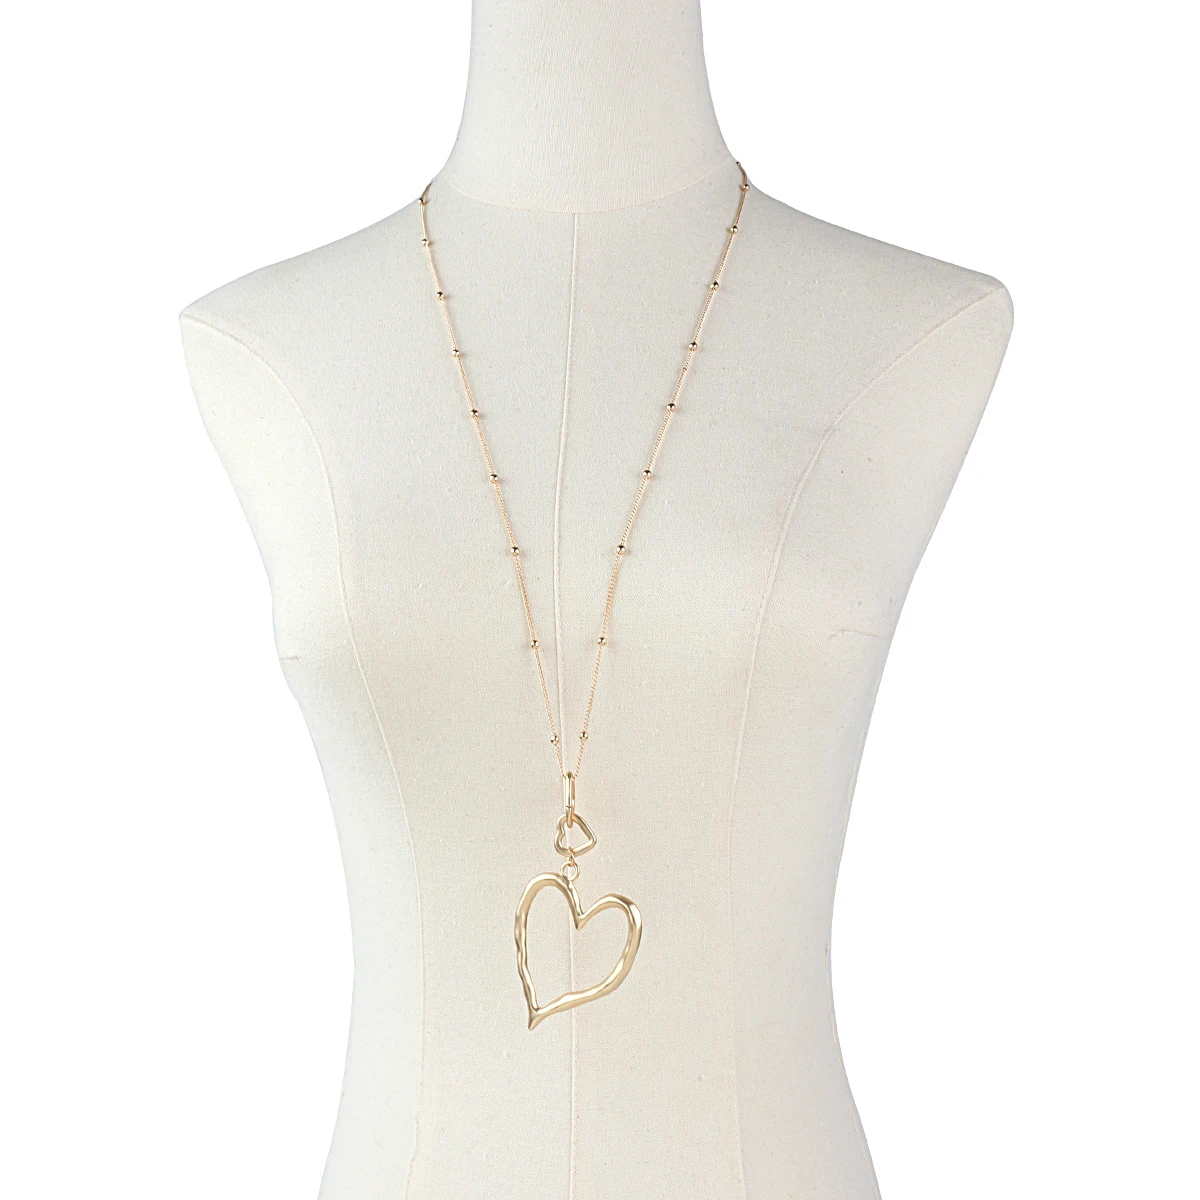 Simple Irregular Triple Hearts Pendant Necklace Collar Adjustable Link Chain Necklace Valentine's Day Mothers Gifts